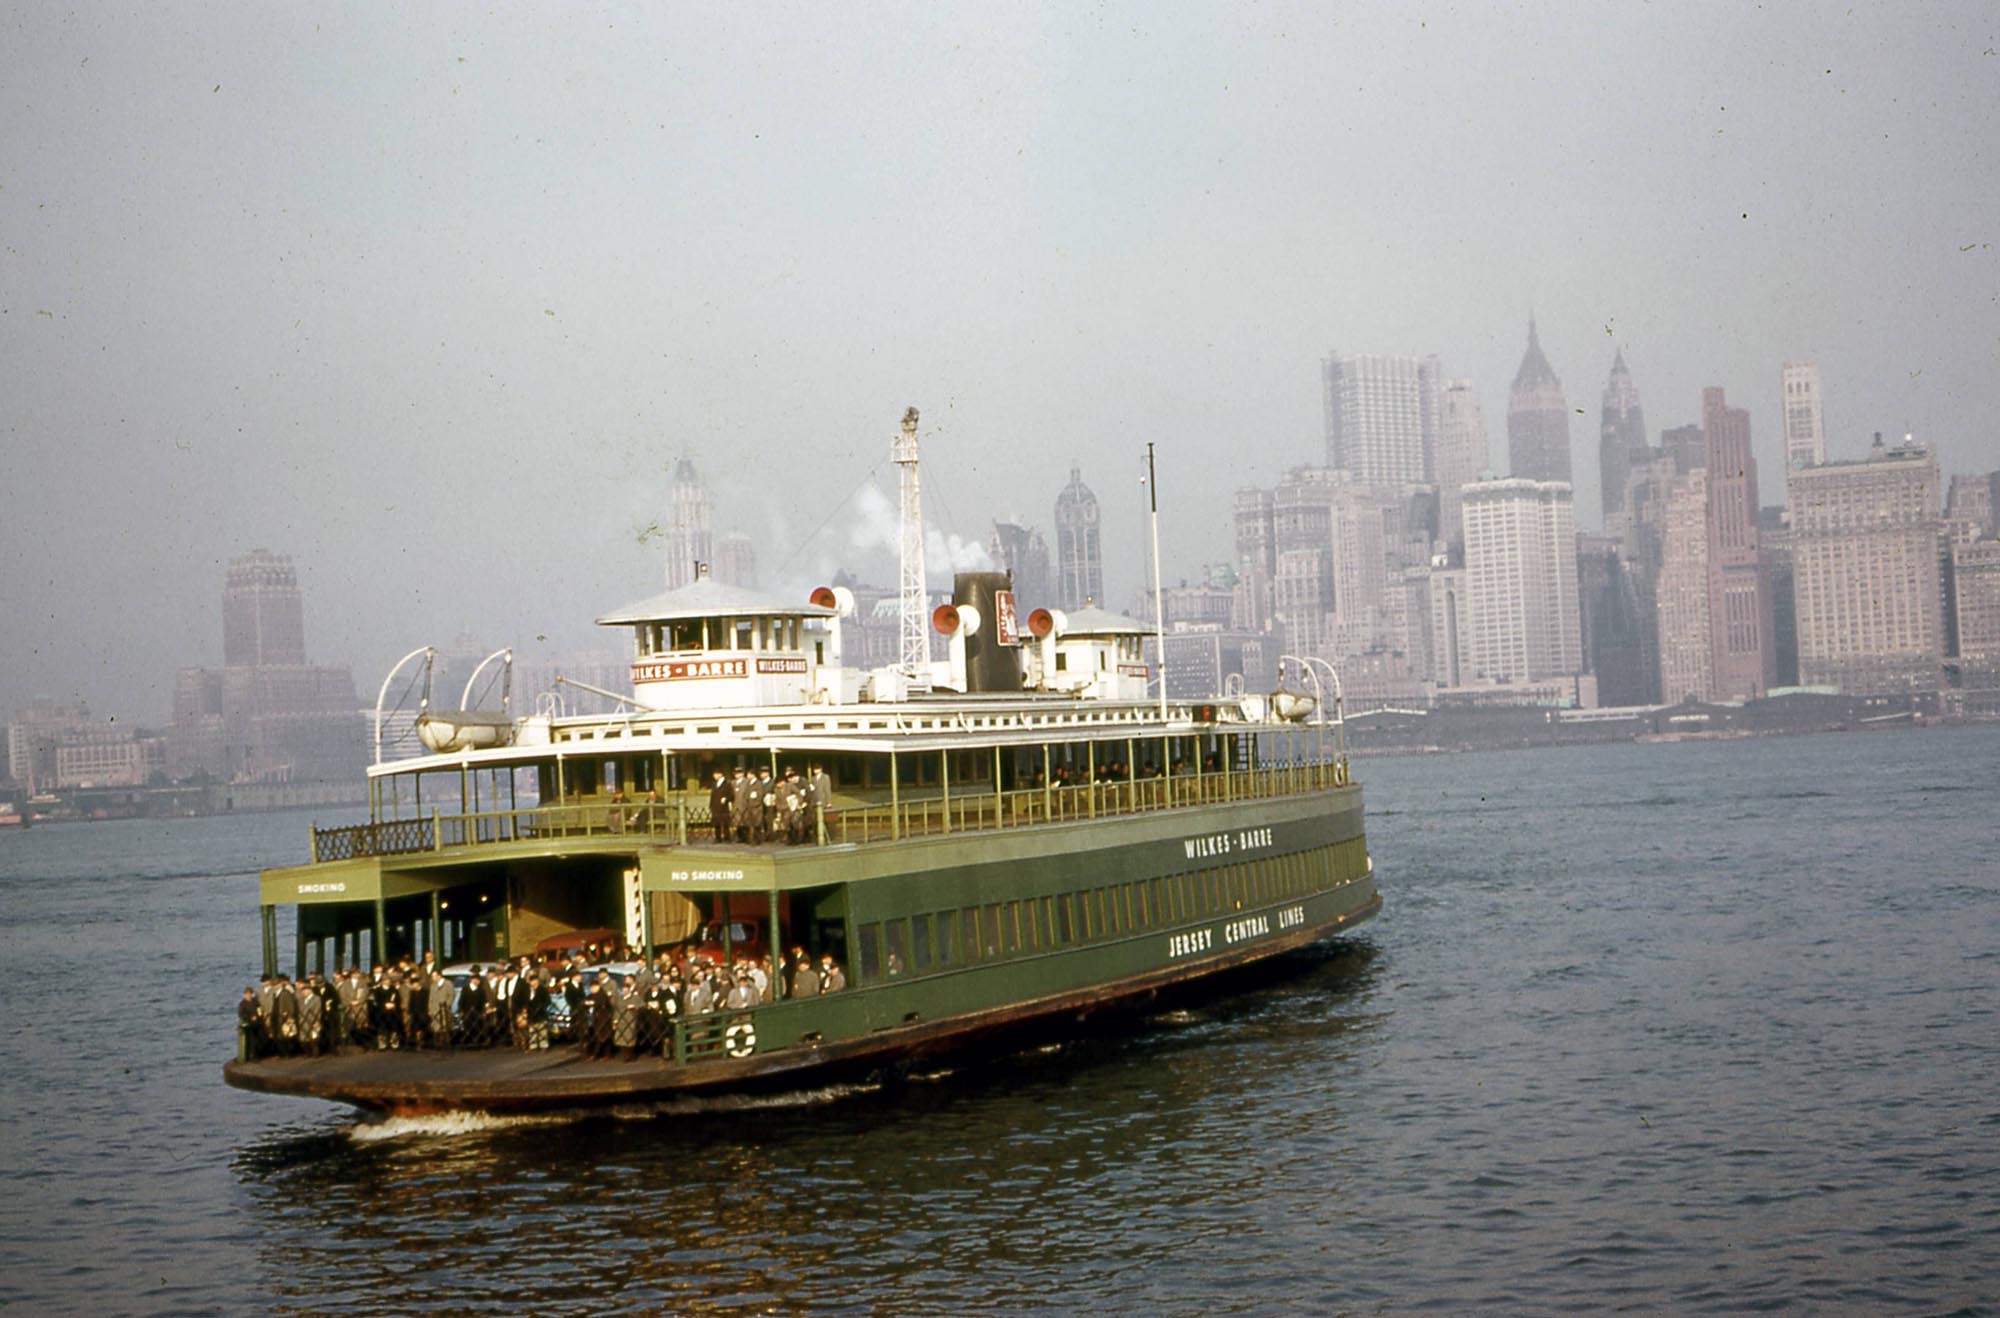 On the afternoon of March 29, 1960 I had occasion to ride the Jersey Central Railroad car ferry across the Hudson River into Manhattan. Soon after departing the Jersey City terminal I snapped this photo of the Ferry Wilkes-Barre with its patrons anxiously awaiting the boat to dock.

Not long after I took the photo, a similar shot appeared as the centerfold in the Saturday Evening Post magazine. The post captioned their photo as the "Five O'Clock Sailors," which I thought was totally appropriate.  This ferry operation is, of course, long gone from the scene. The slow ASA 10 speed of the Kodachrome film of the day seems to have taken its toll on the camera's ability to stop moving objects.  35mm Kodachrome Retina IIIc folding camera.  William D. Volkmer